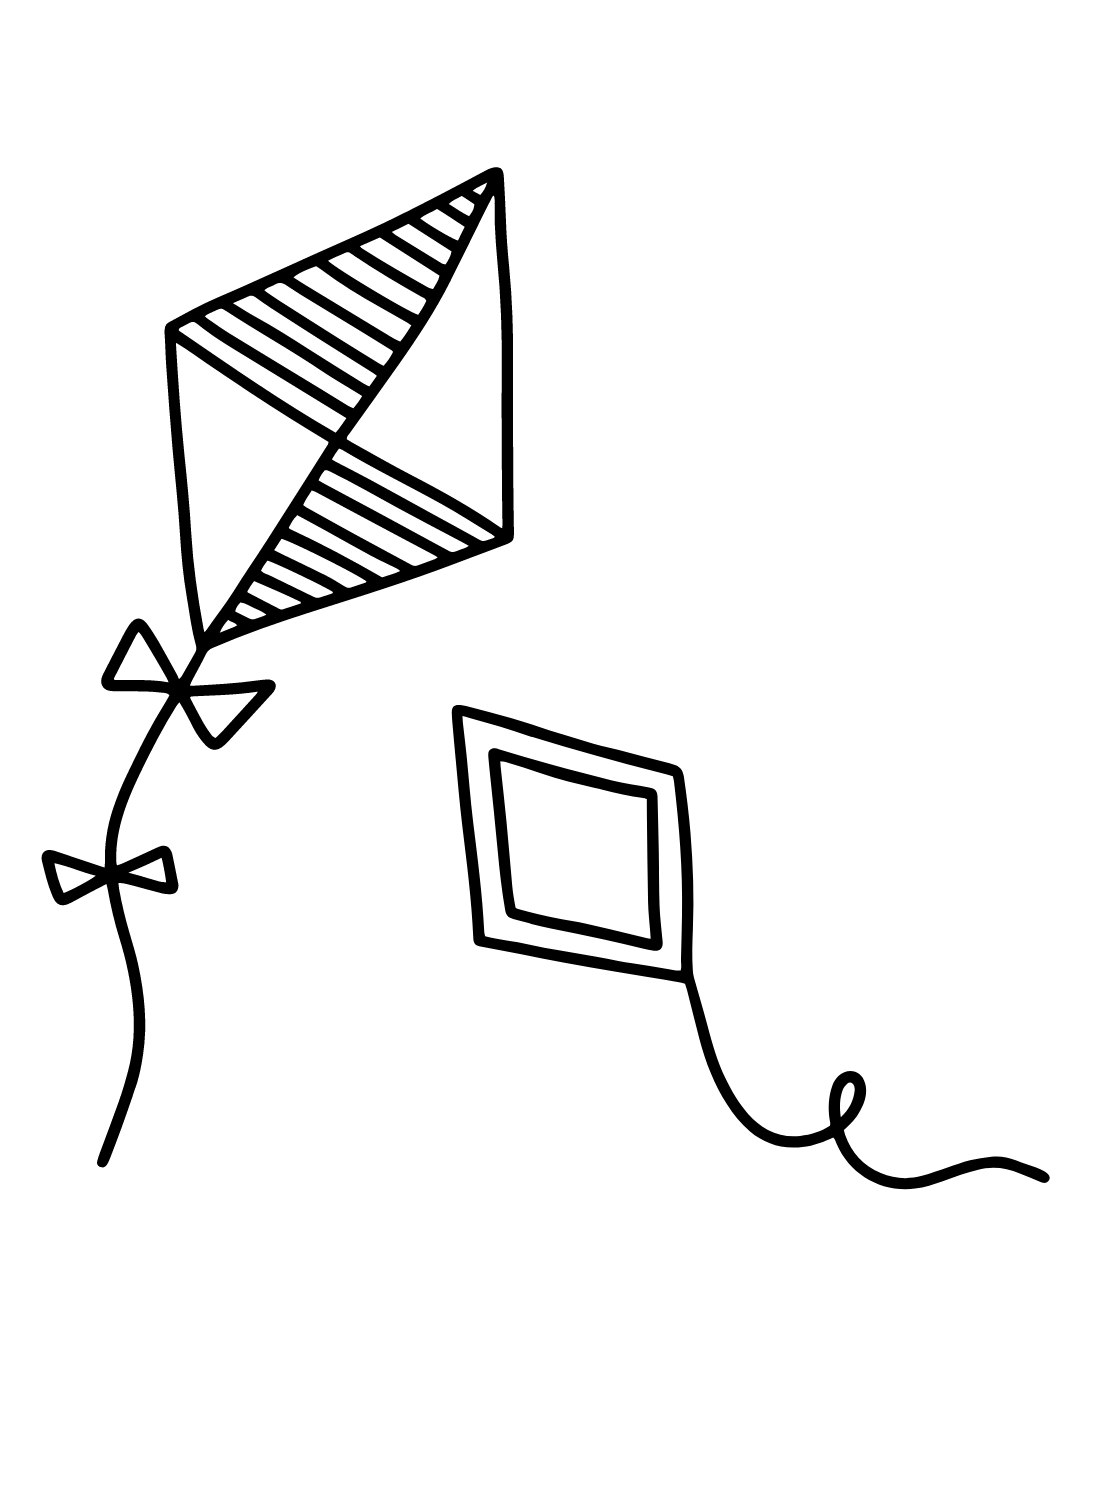 Draw Kite Coloring Page